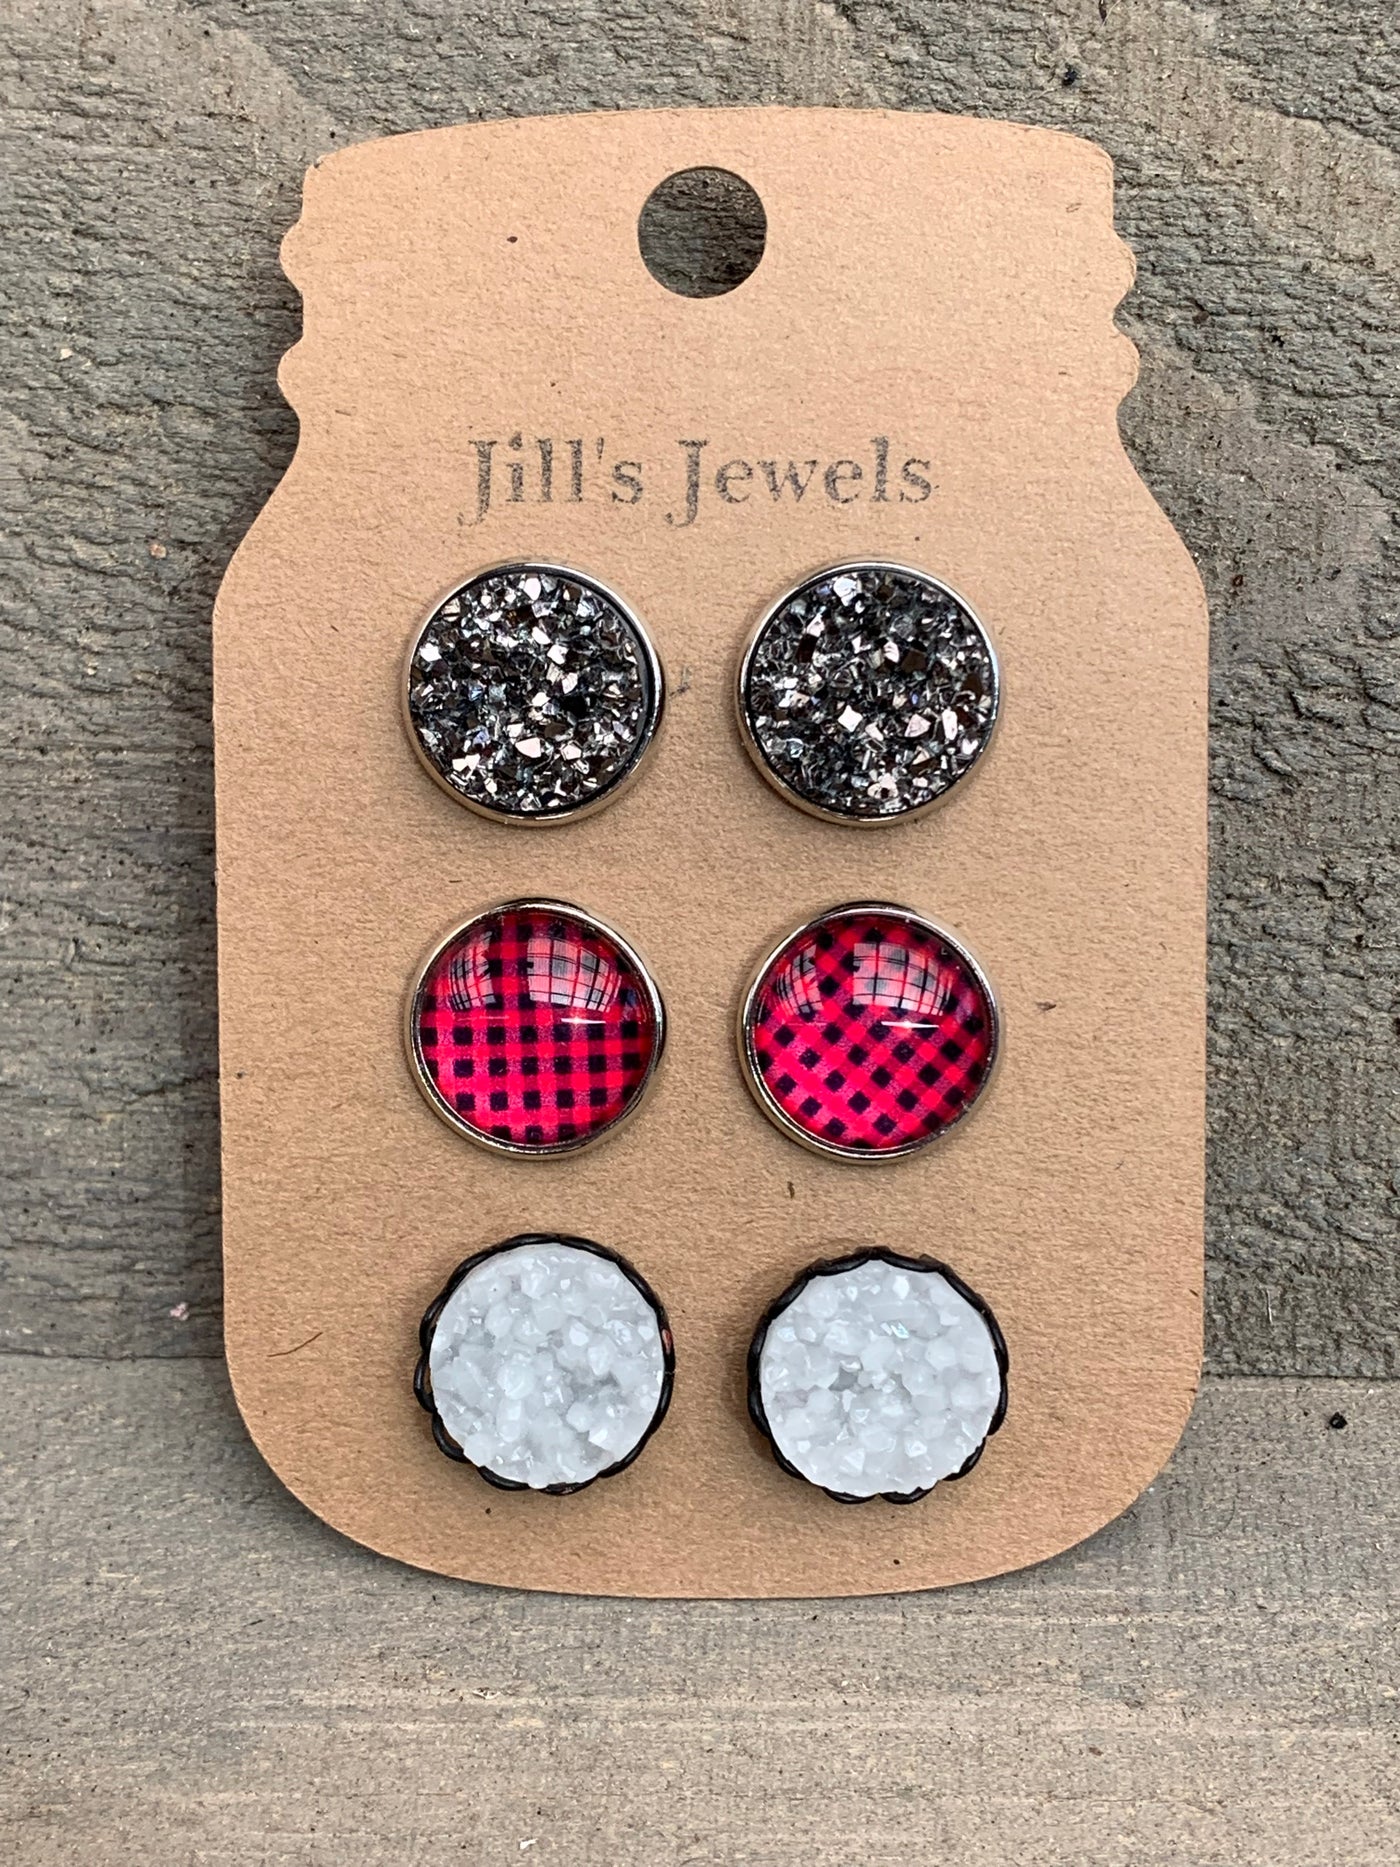 Buffalo Plaid Silver Faux Druzy Earring 3 Set - Jill's Jewels | Unique, Handcrafted, Trendy, And Fun Jewelry